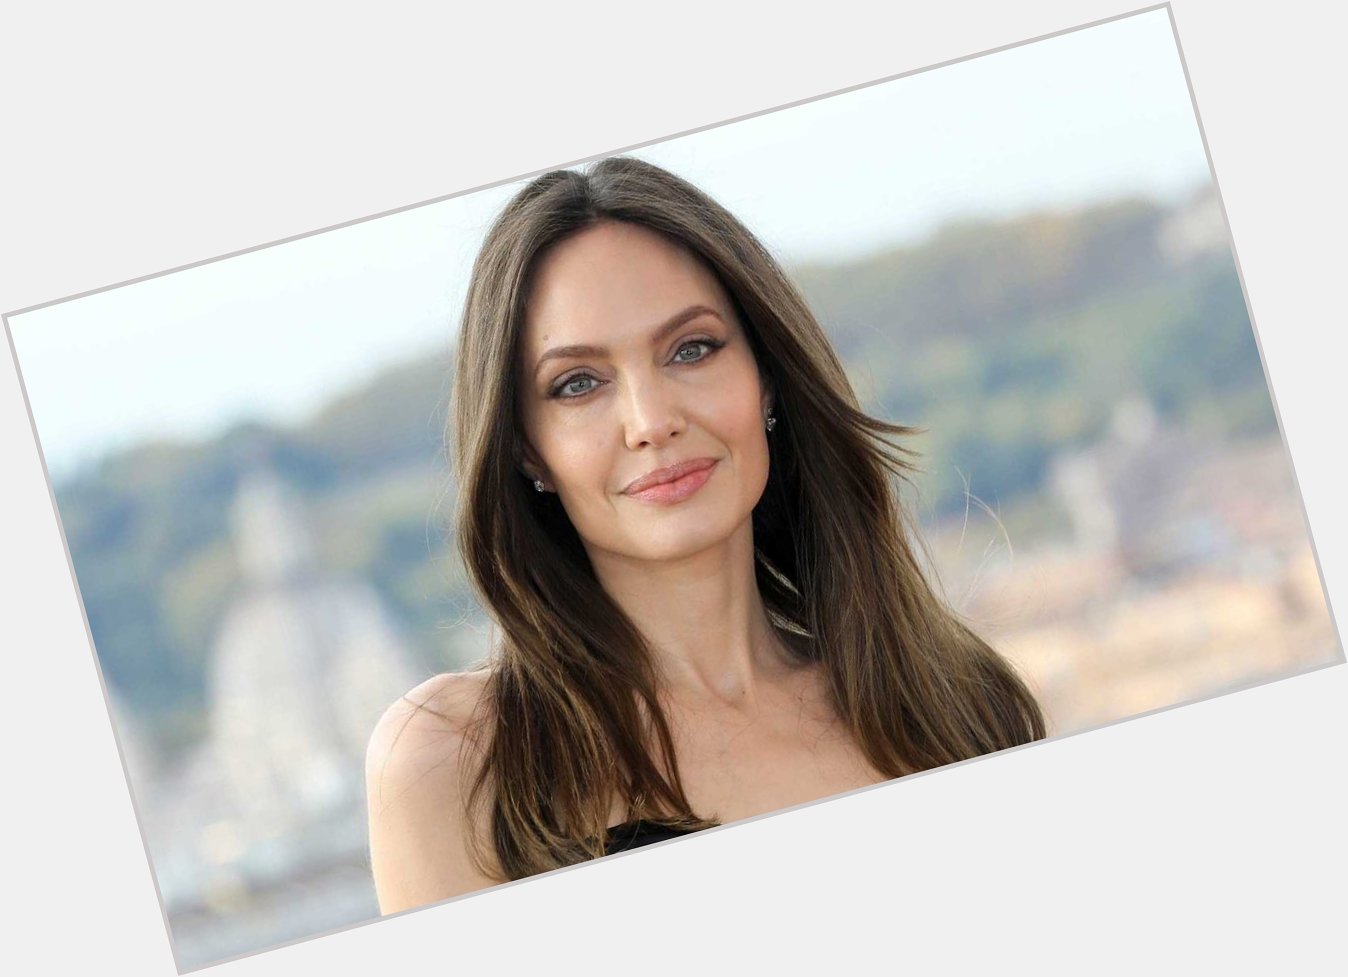 Happy birthday to the beautiful Angelina Jolie, the actress who plays Thena in the MCU 